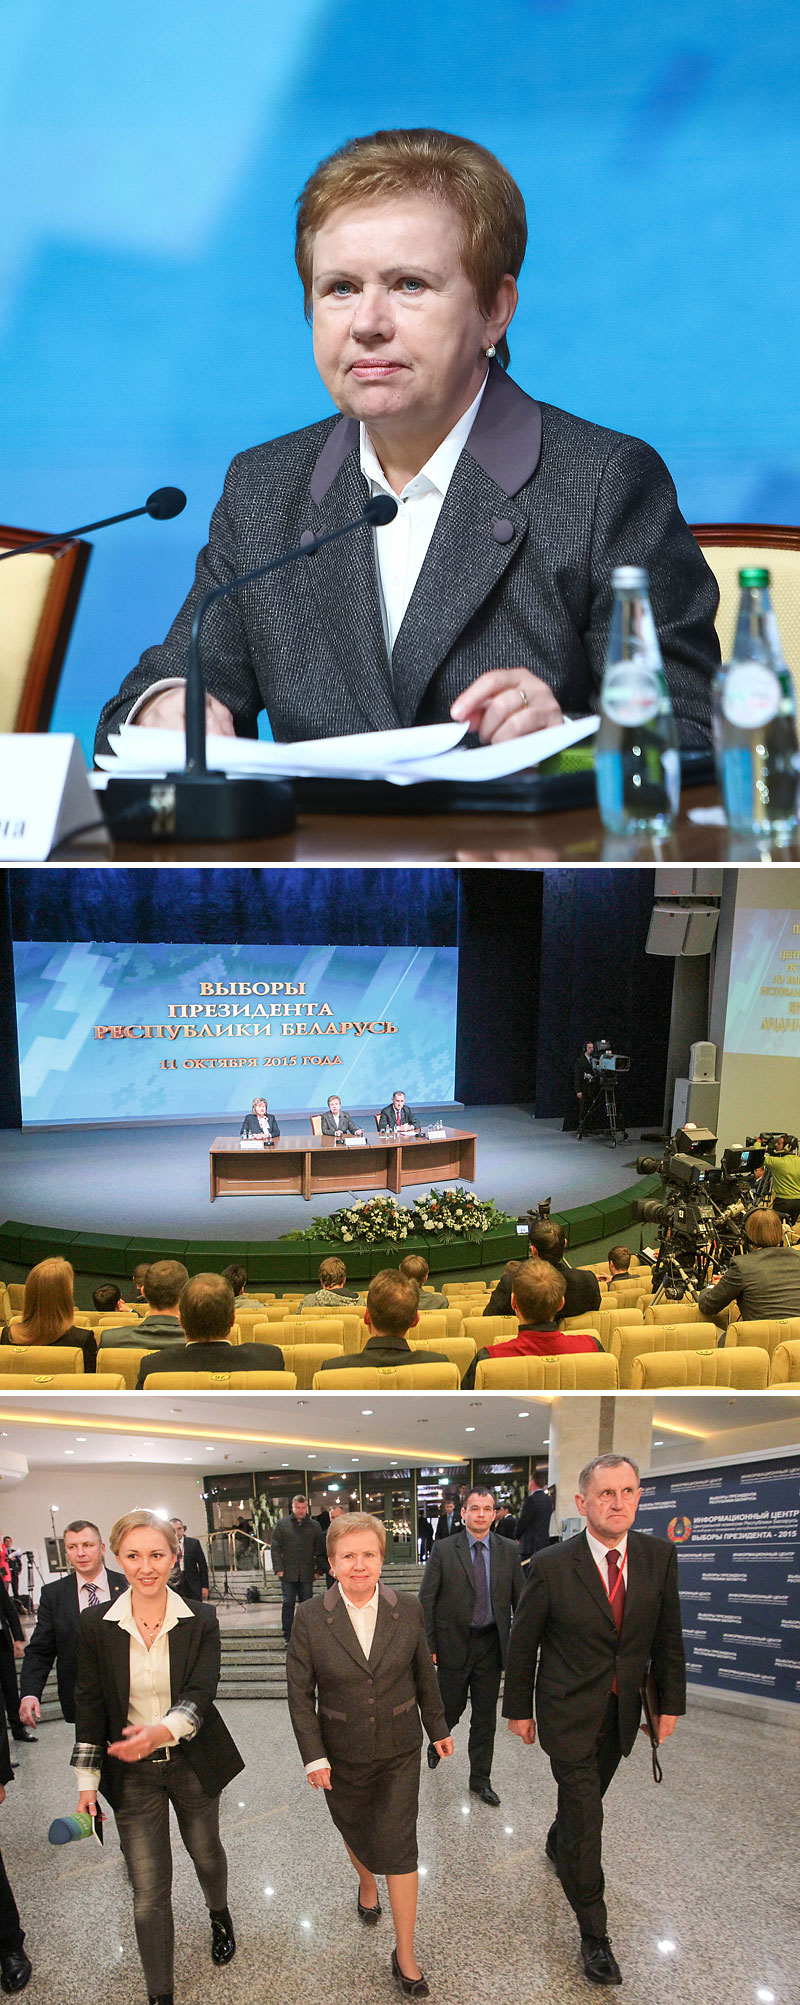 Chairperson of Belarus’ Central Election Commission Lidia Yermoshina at a press conference in the 2015 President Election information center